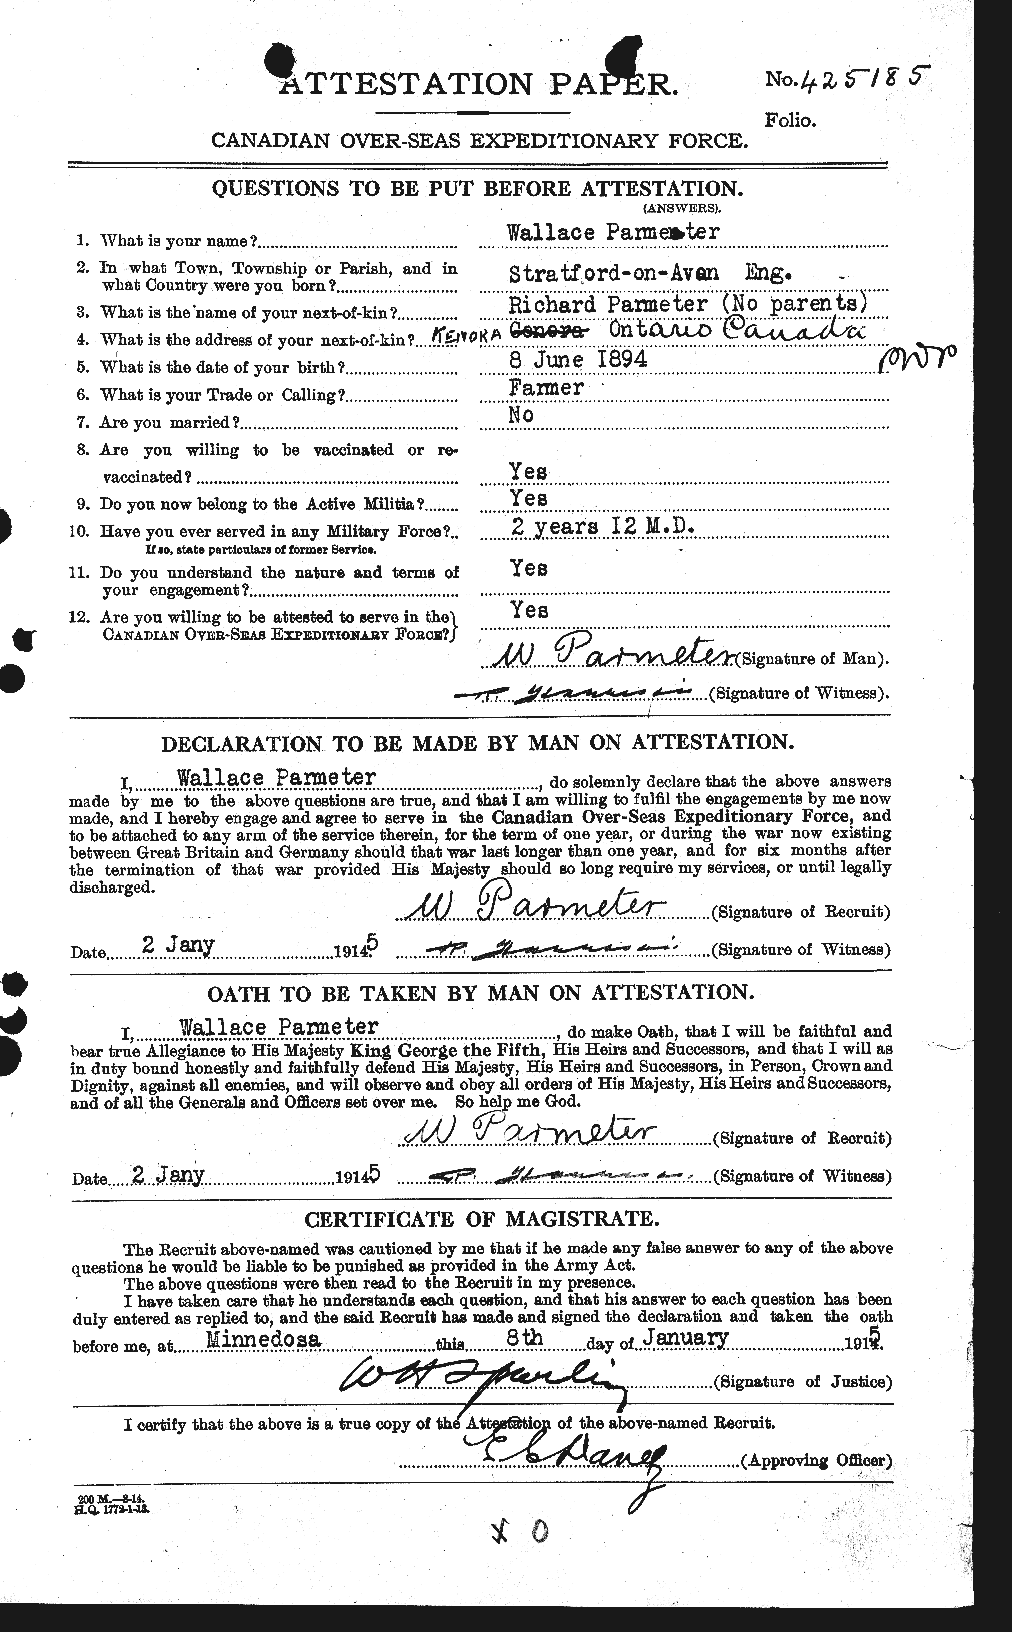 Personnel Records of the First World War - CEF 566323a